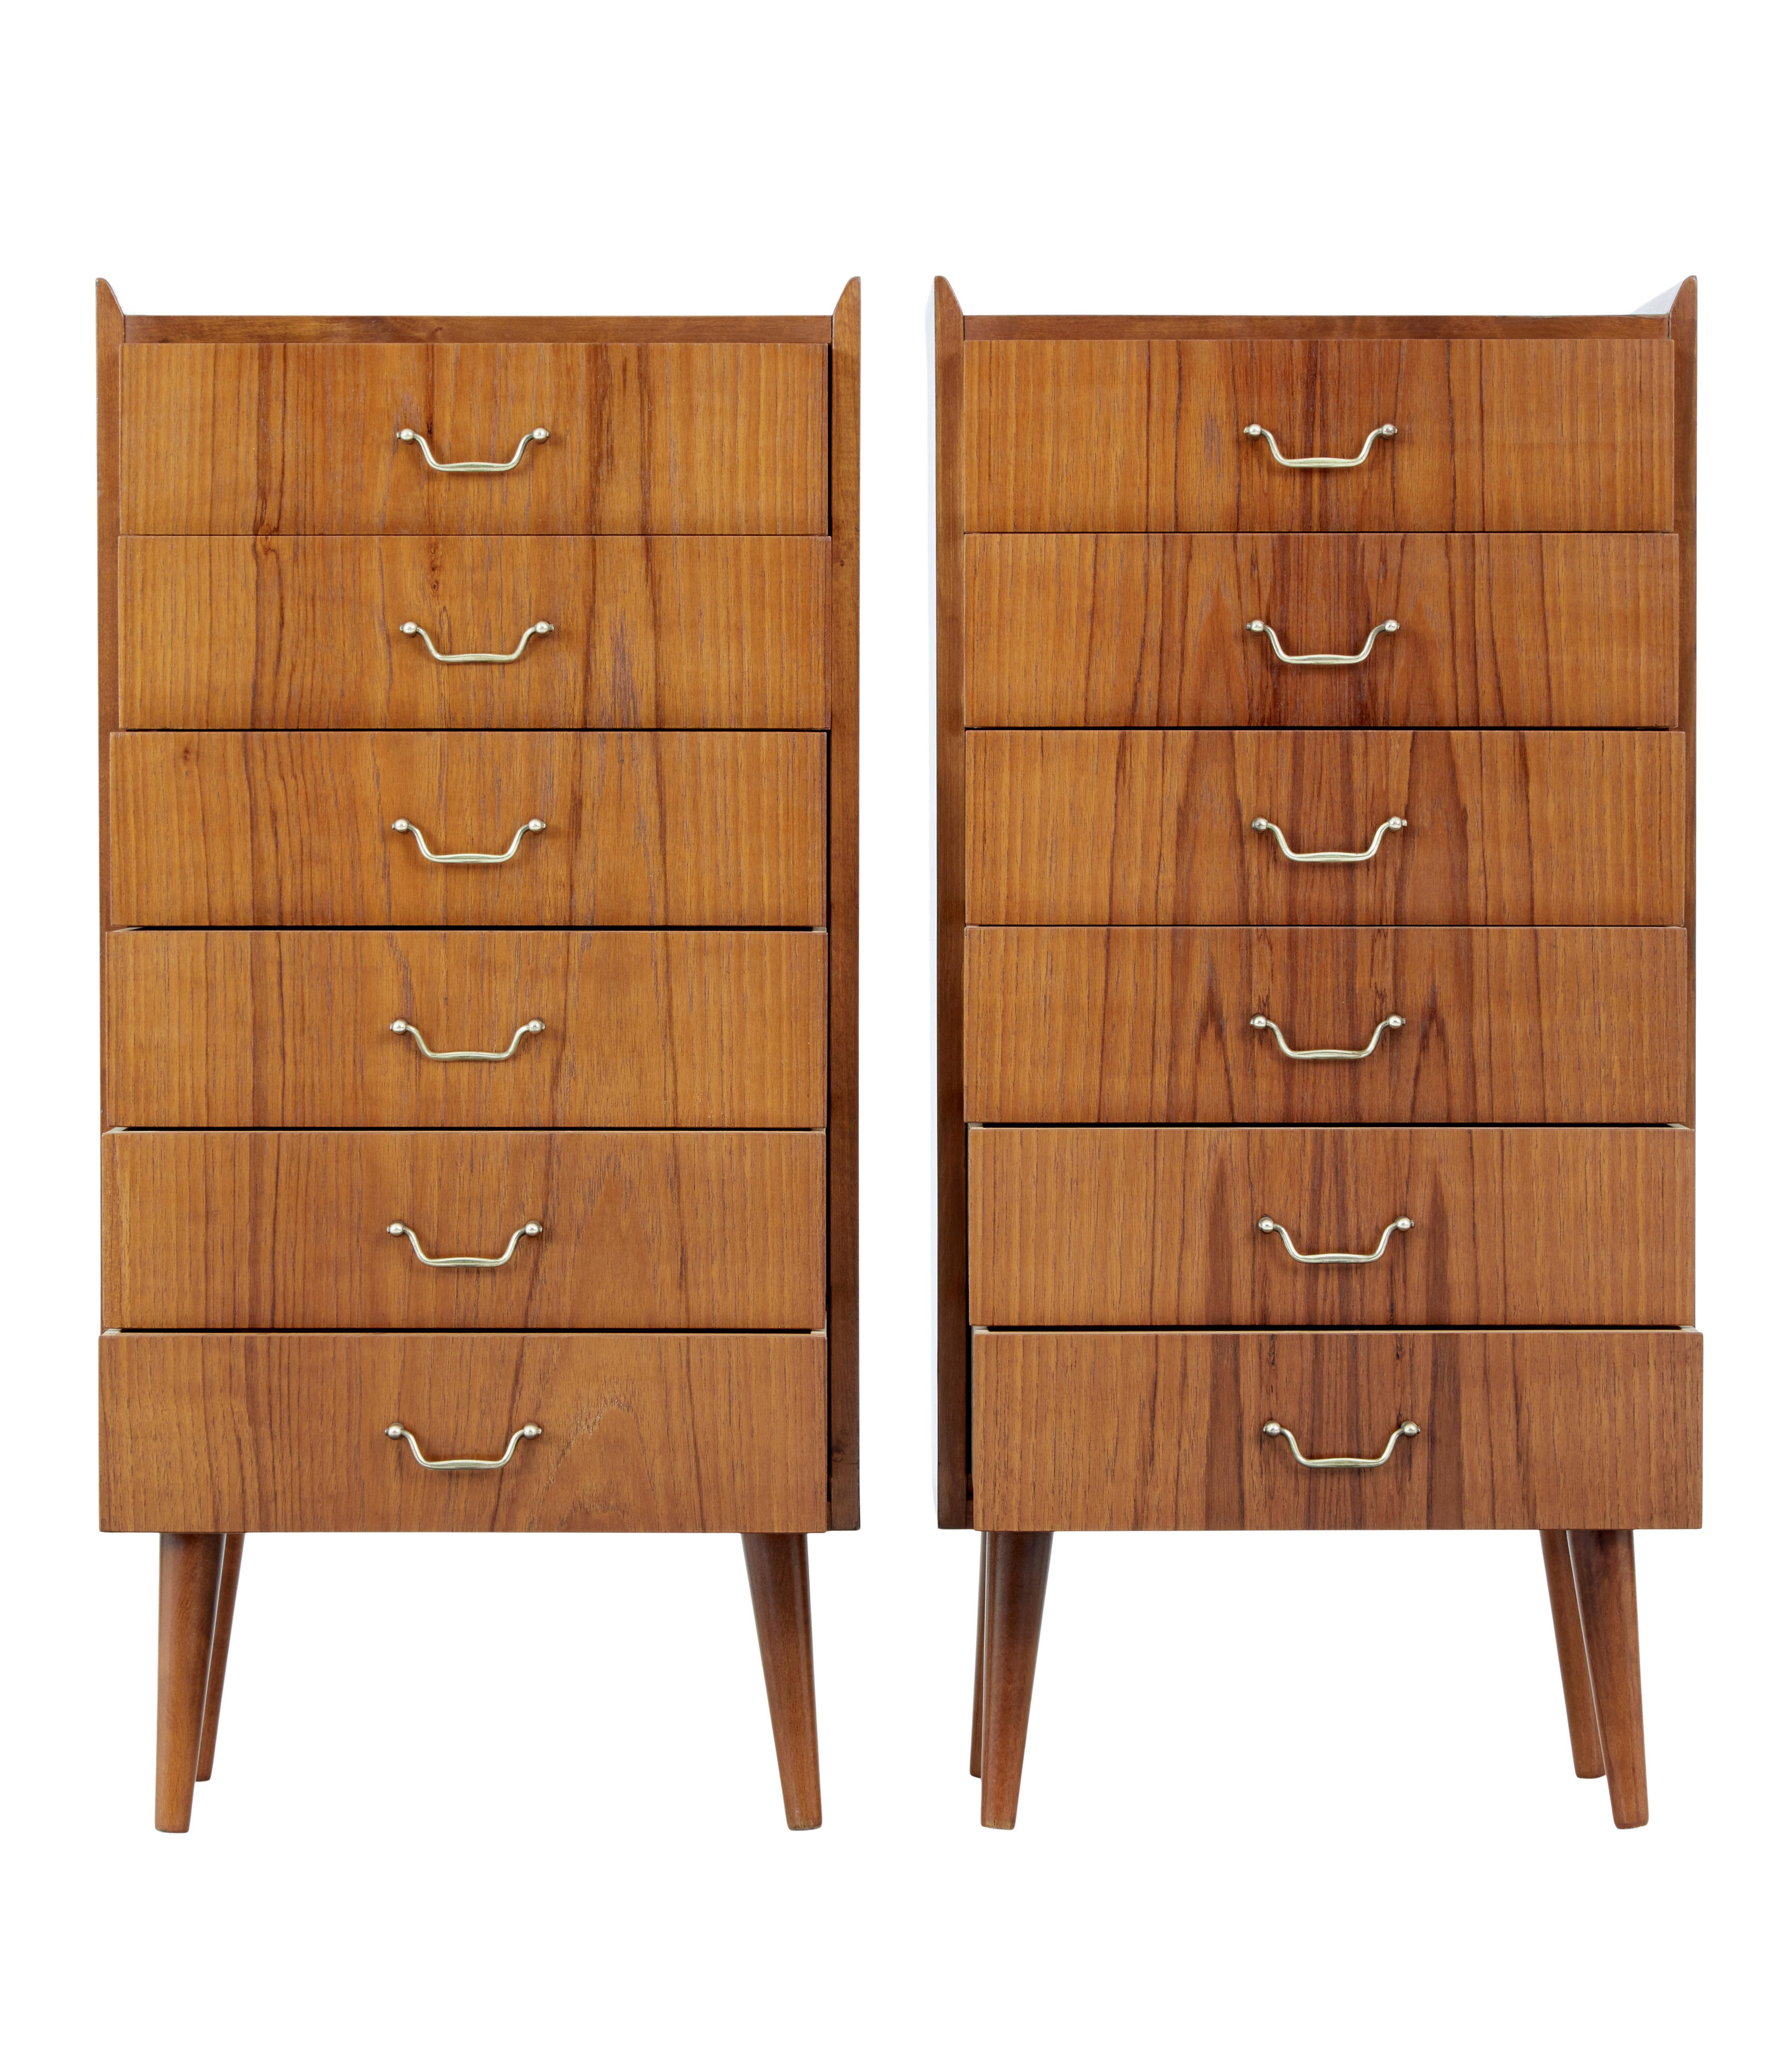 Pair of mid 20th century Scandinavian teak chest of drawers, circa 1960.

Good quality pair of small Swedish chests, each fitted with 6 drawers and brass handles. Recently re-finished in our workshop. Ideal for use in the home office or even as a